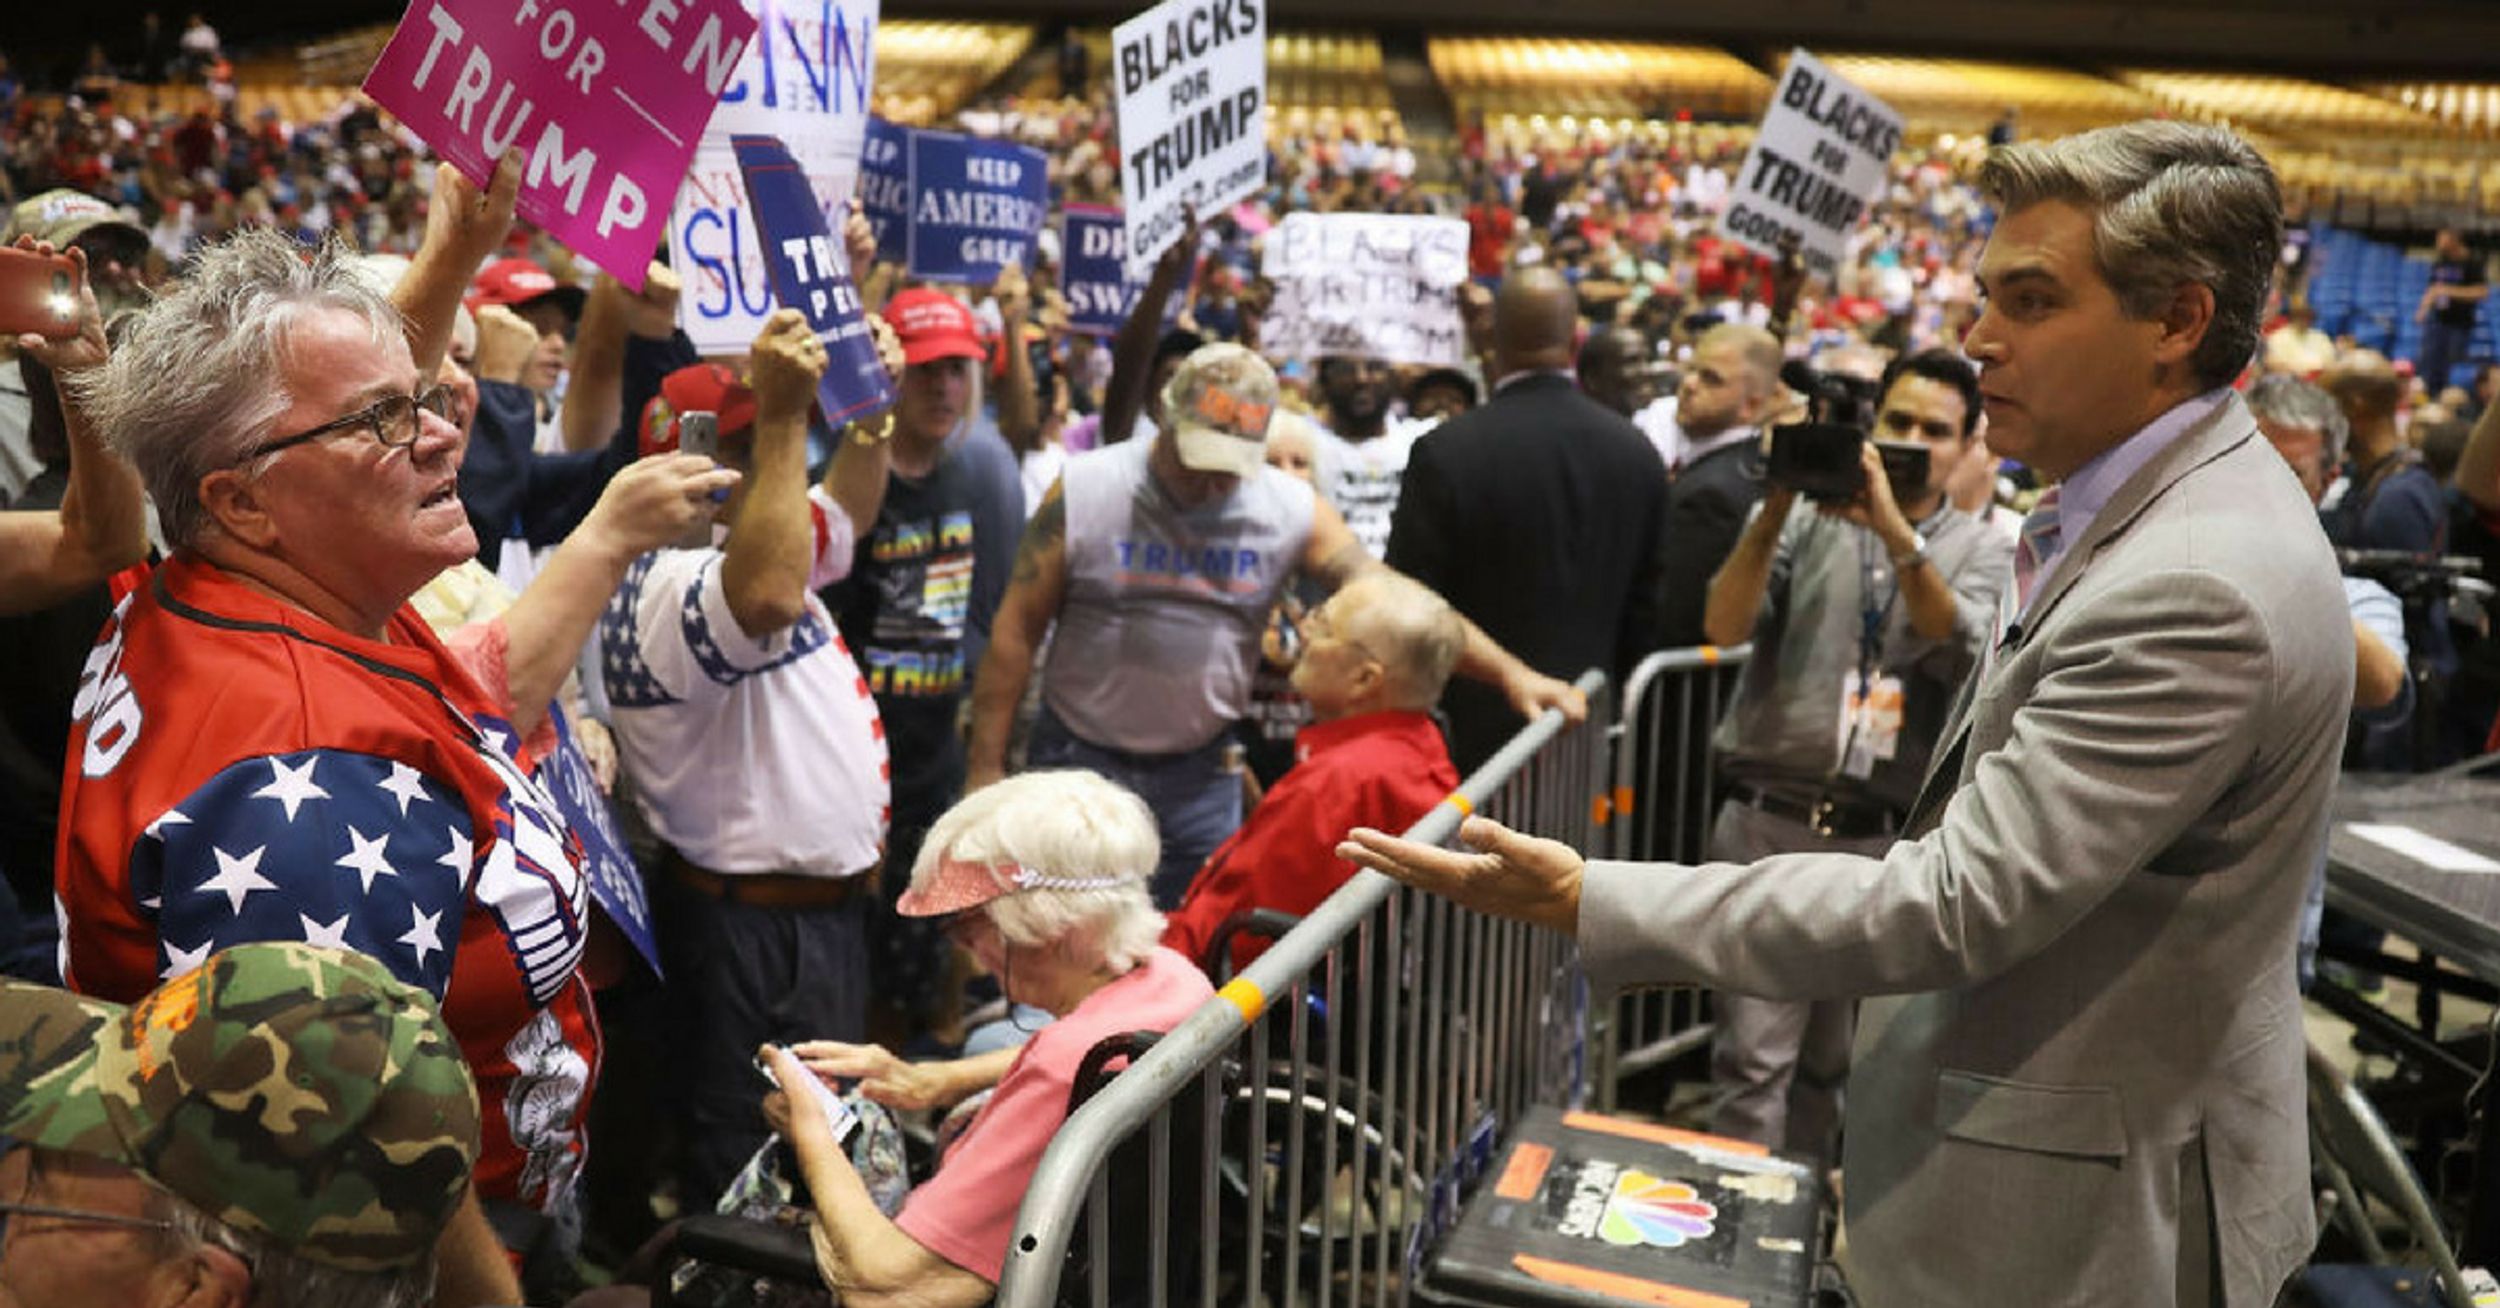 Jim Acosta Issues Warning After Anti-Media Hostility Reaches Boiling Point At Trump Rally